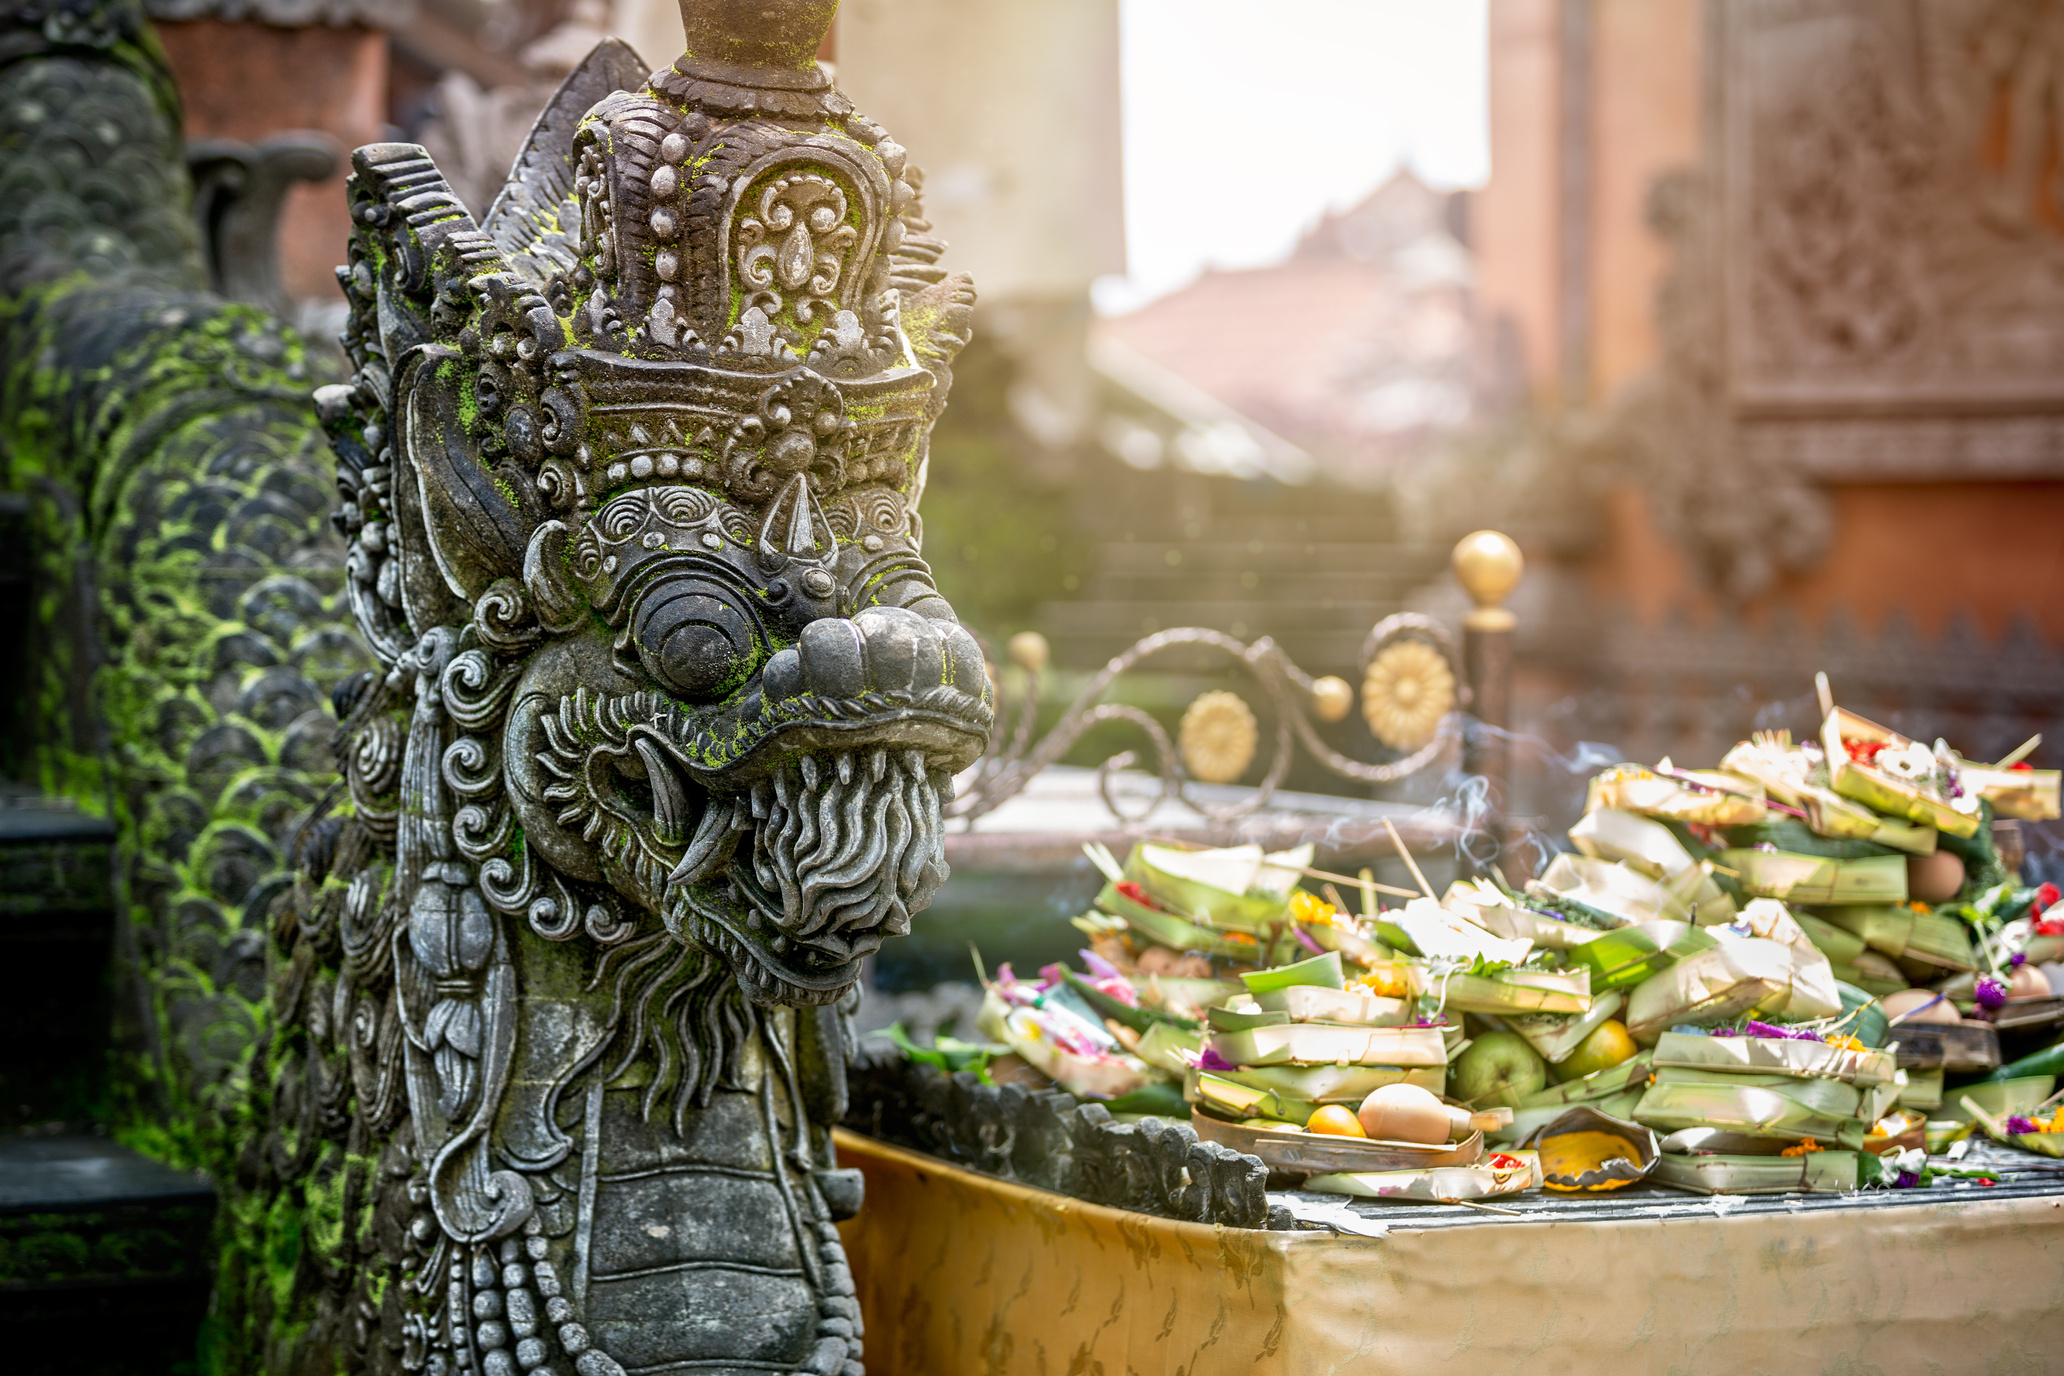 Temple offerings to Hindu God, Bali, Indonesia